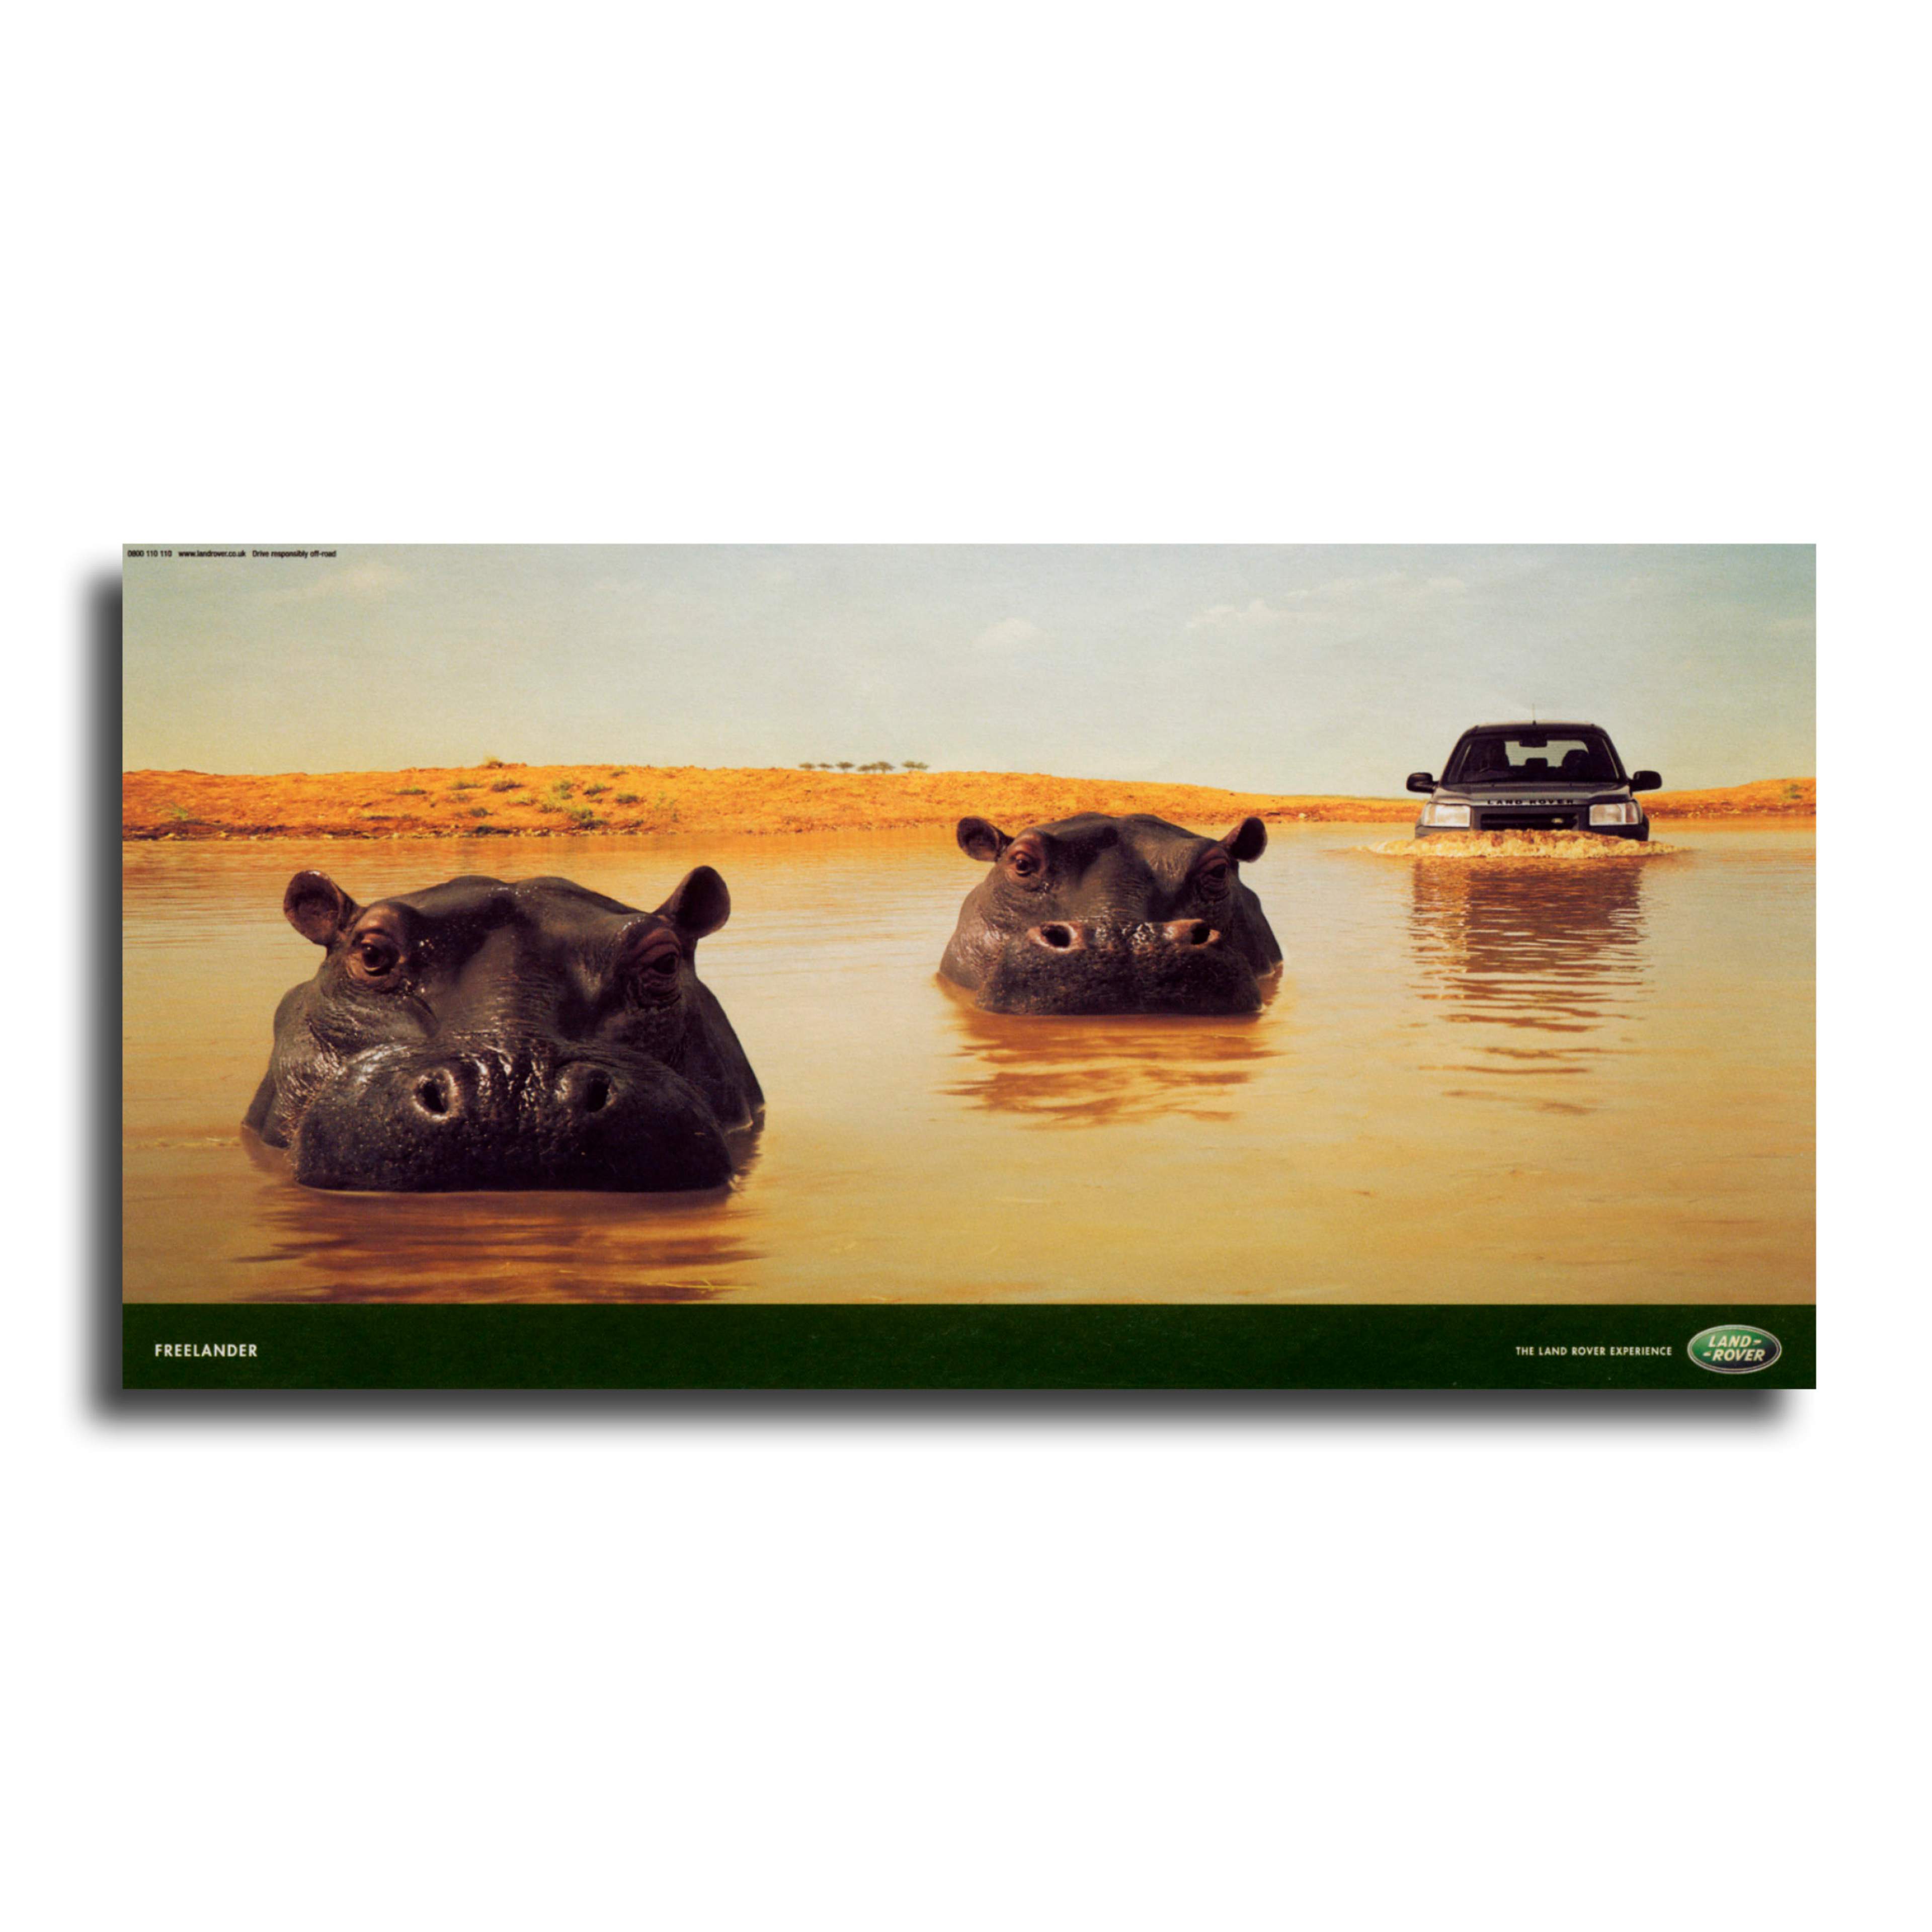 Photograph of two hippos submerged in water with a Land Rover. 